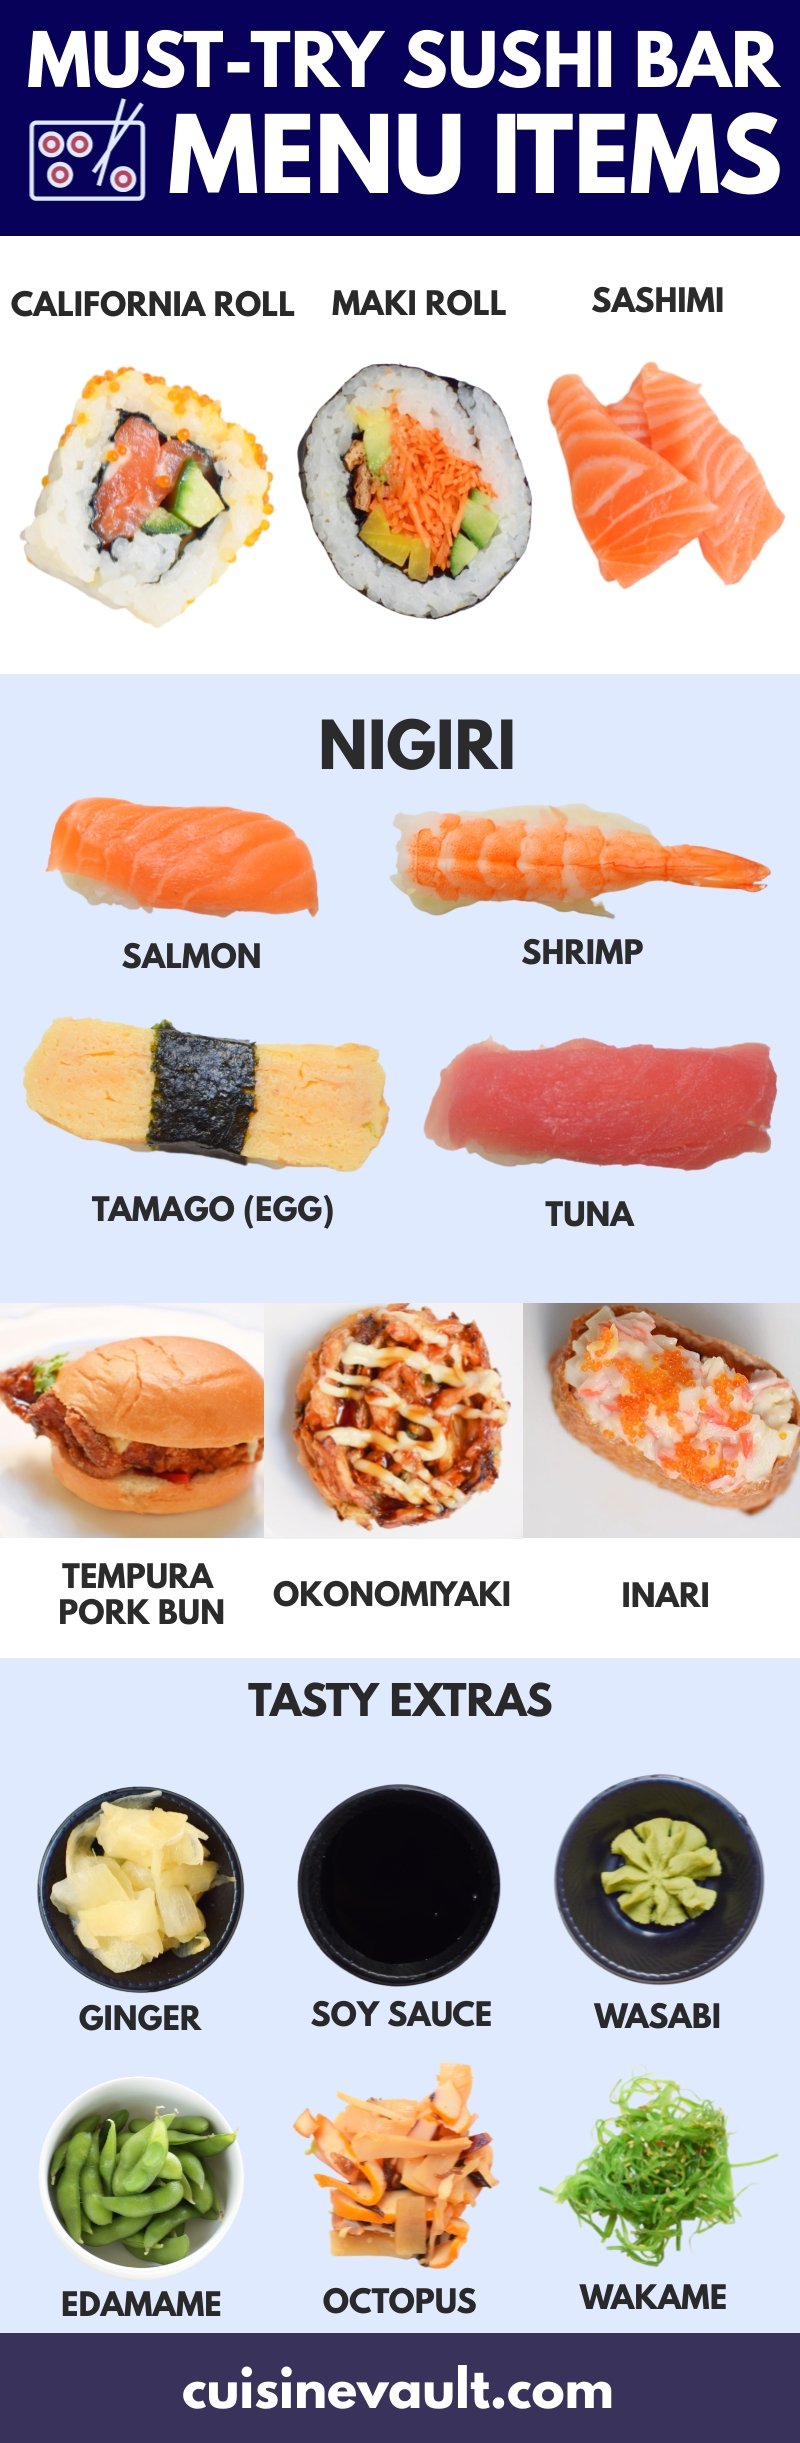 Types of Sushi Infographic